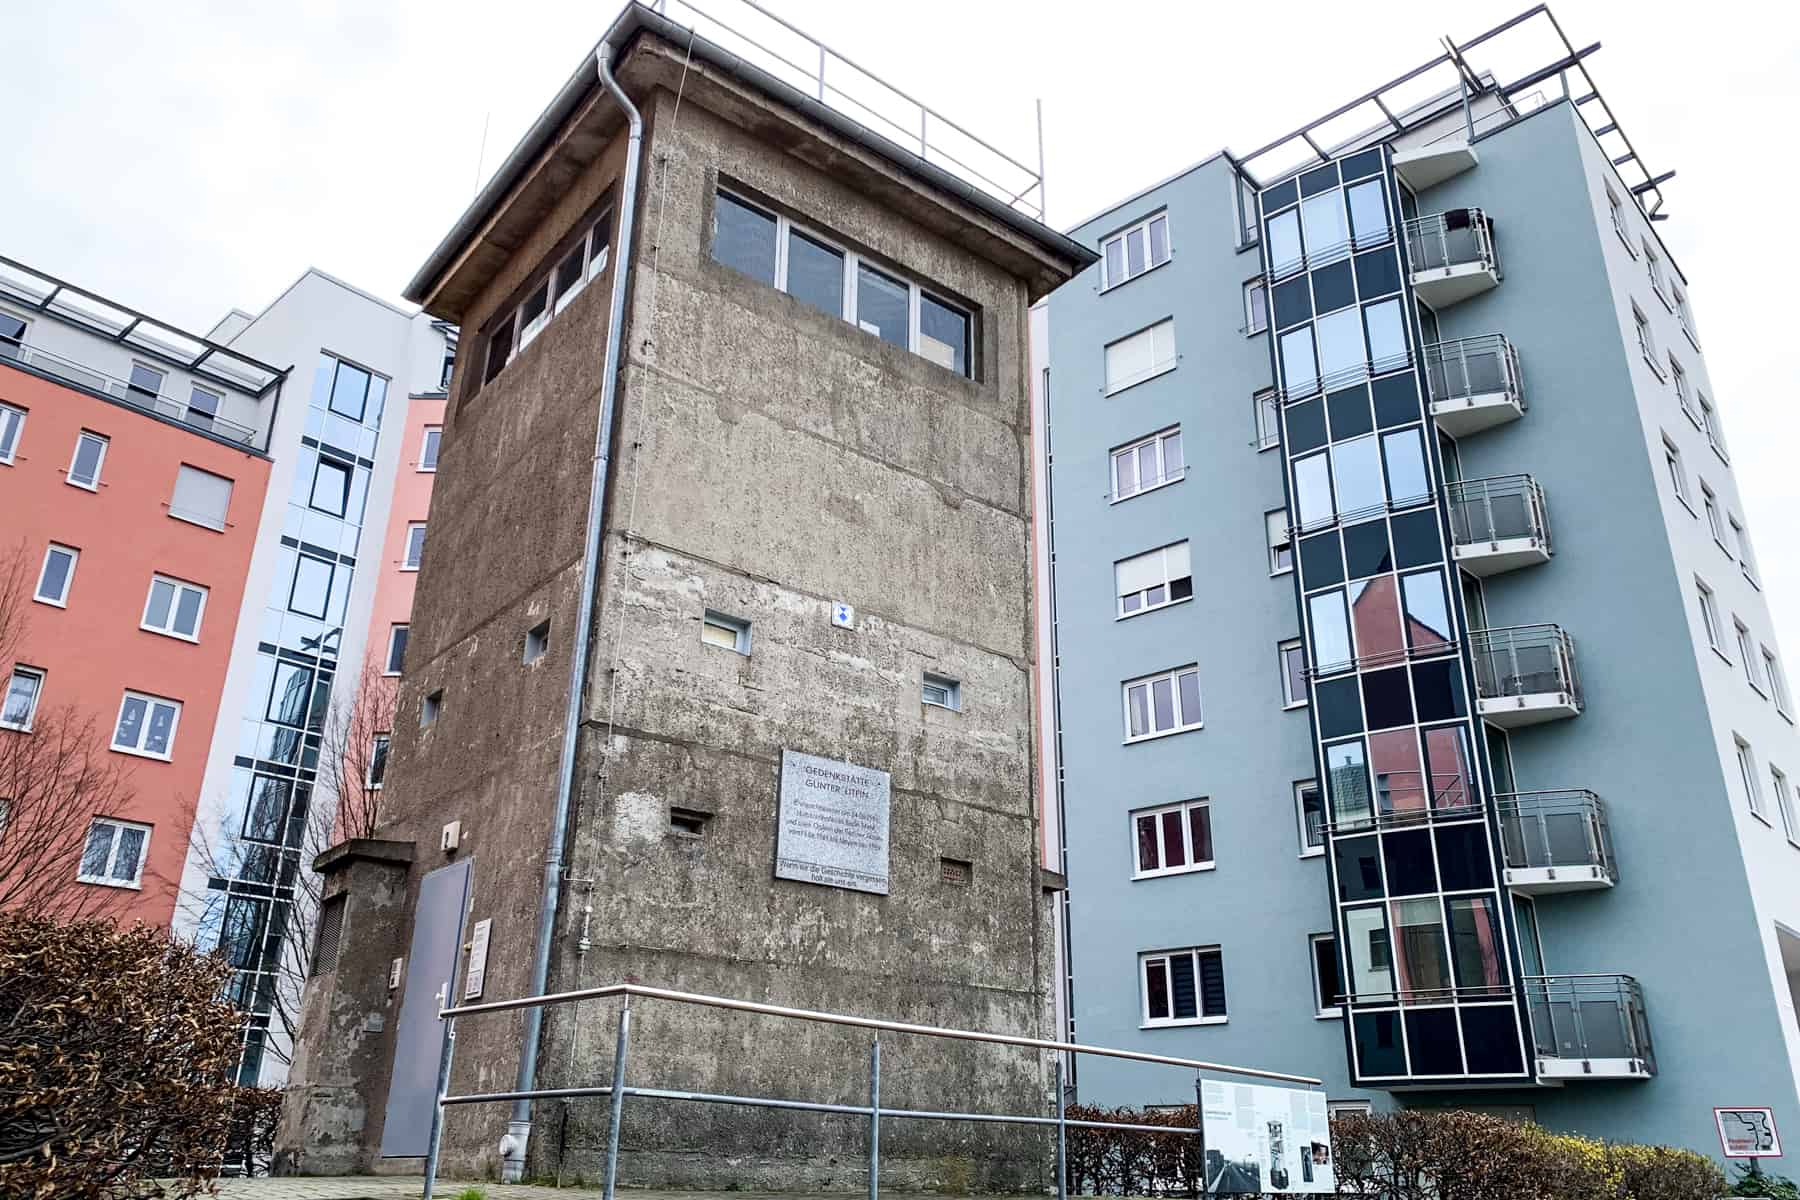 Günter Litfin Memorial is a preserved Berlin Wall Watchtower that stands in front of a modern orange and blue apartment building